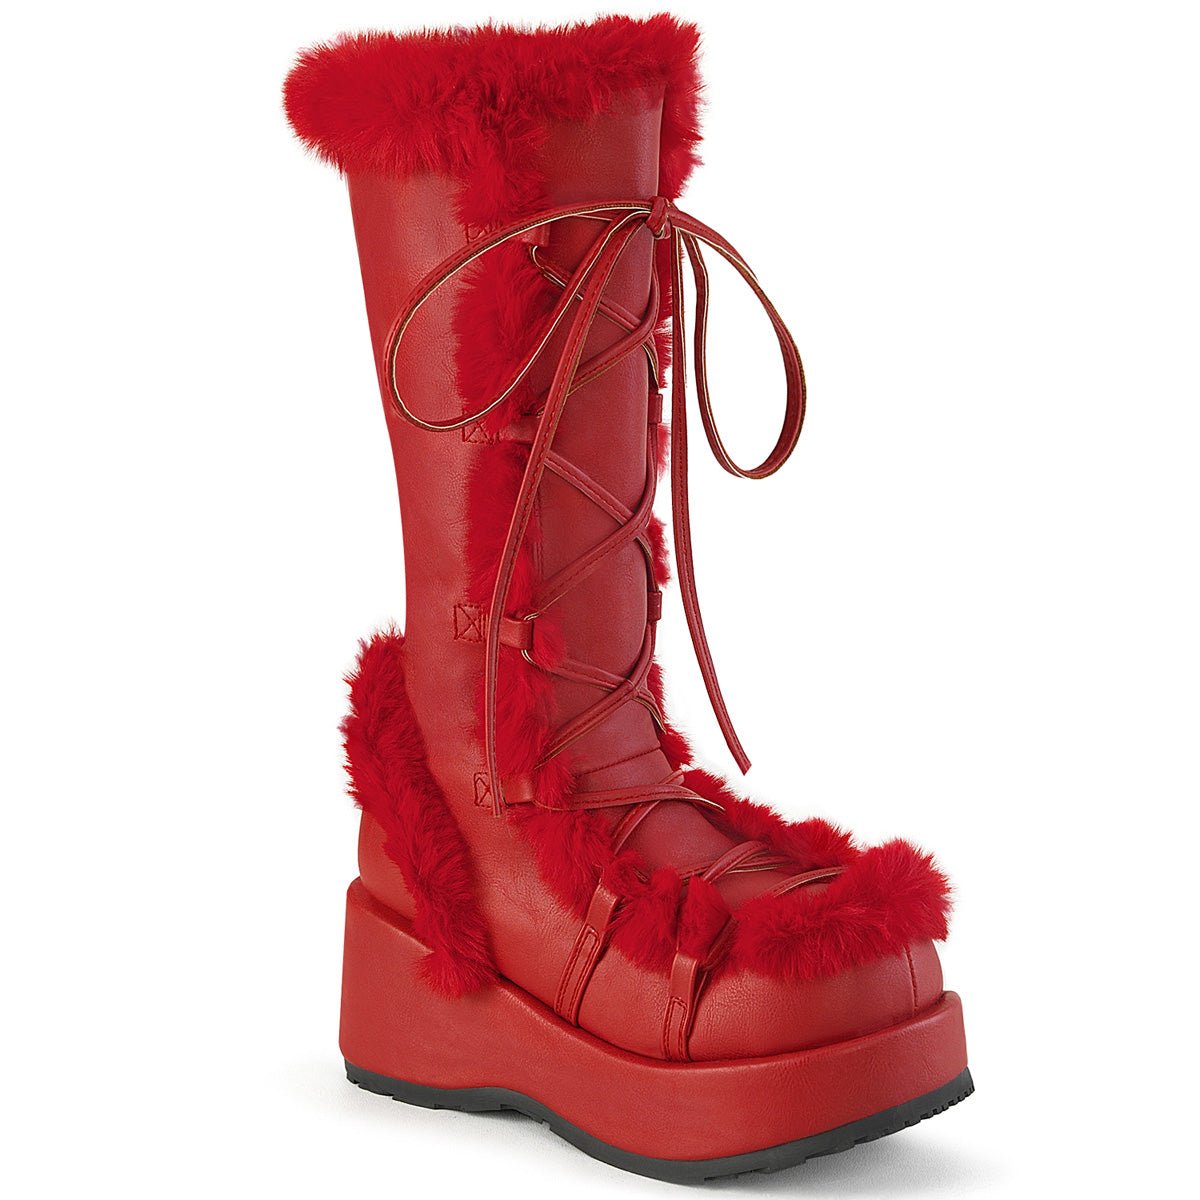 Too Fast | Demonia Cubby 311 | Red Vegan Leather Women's Mid Calf Boots